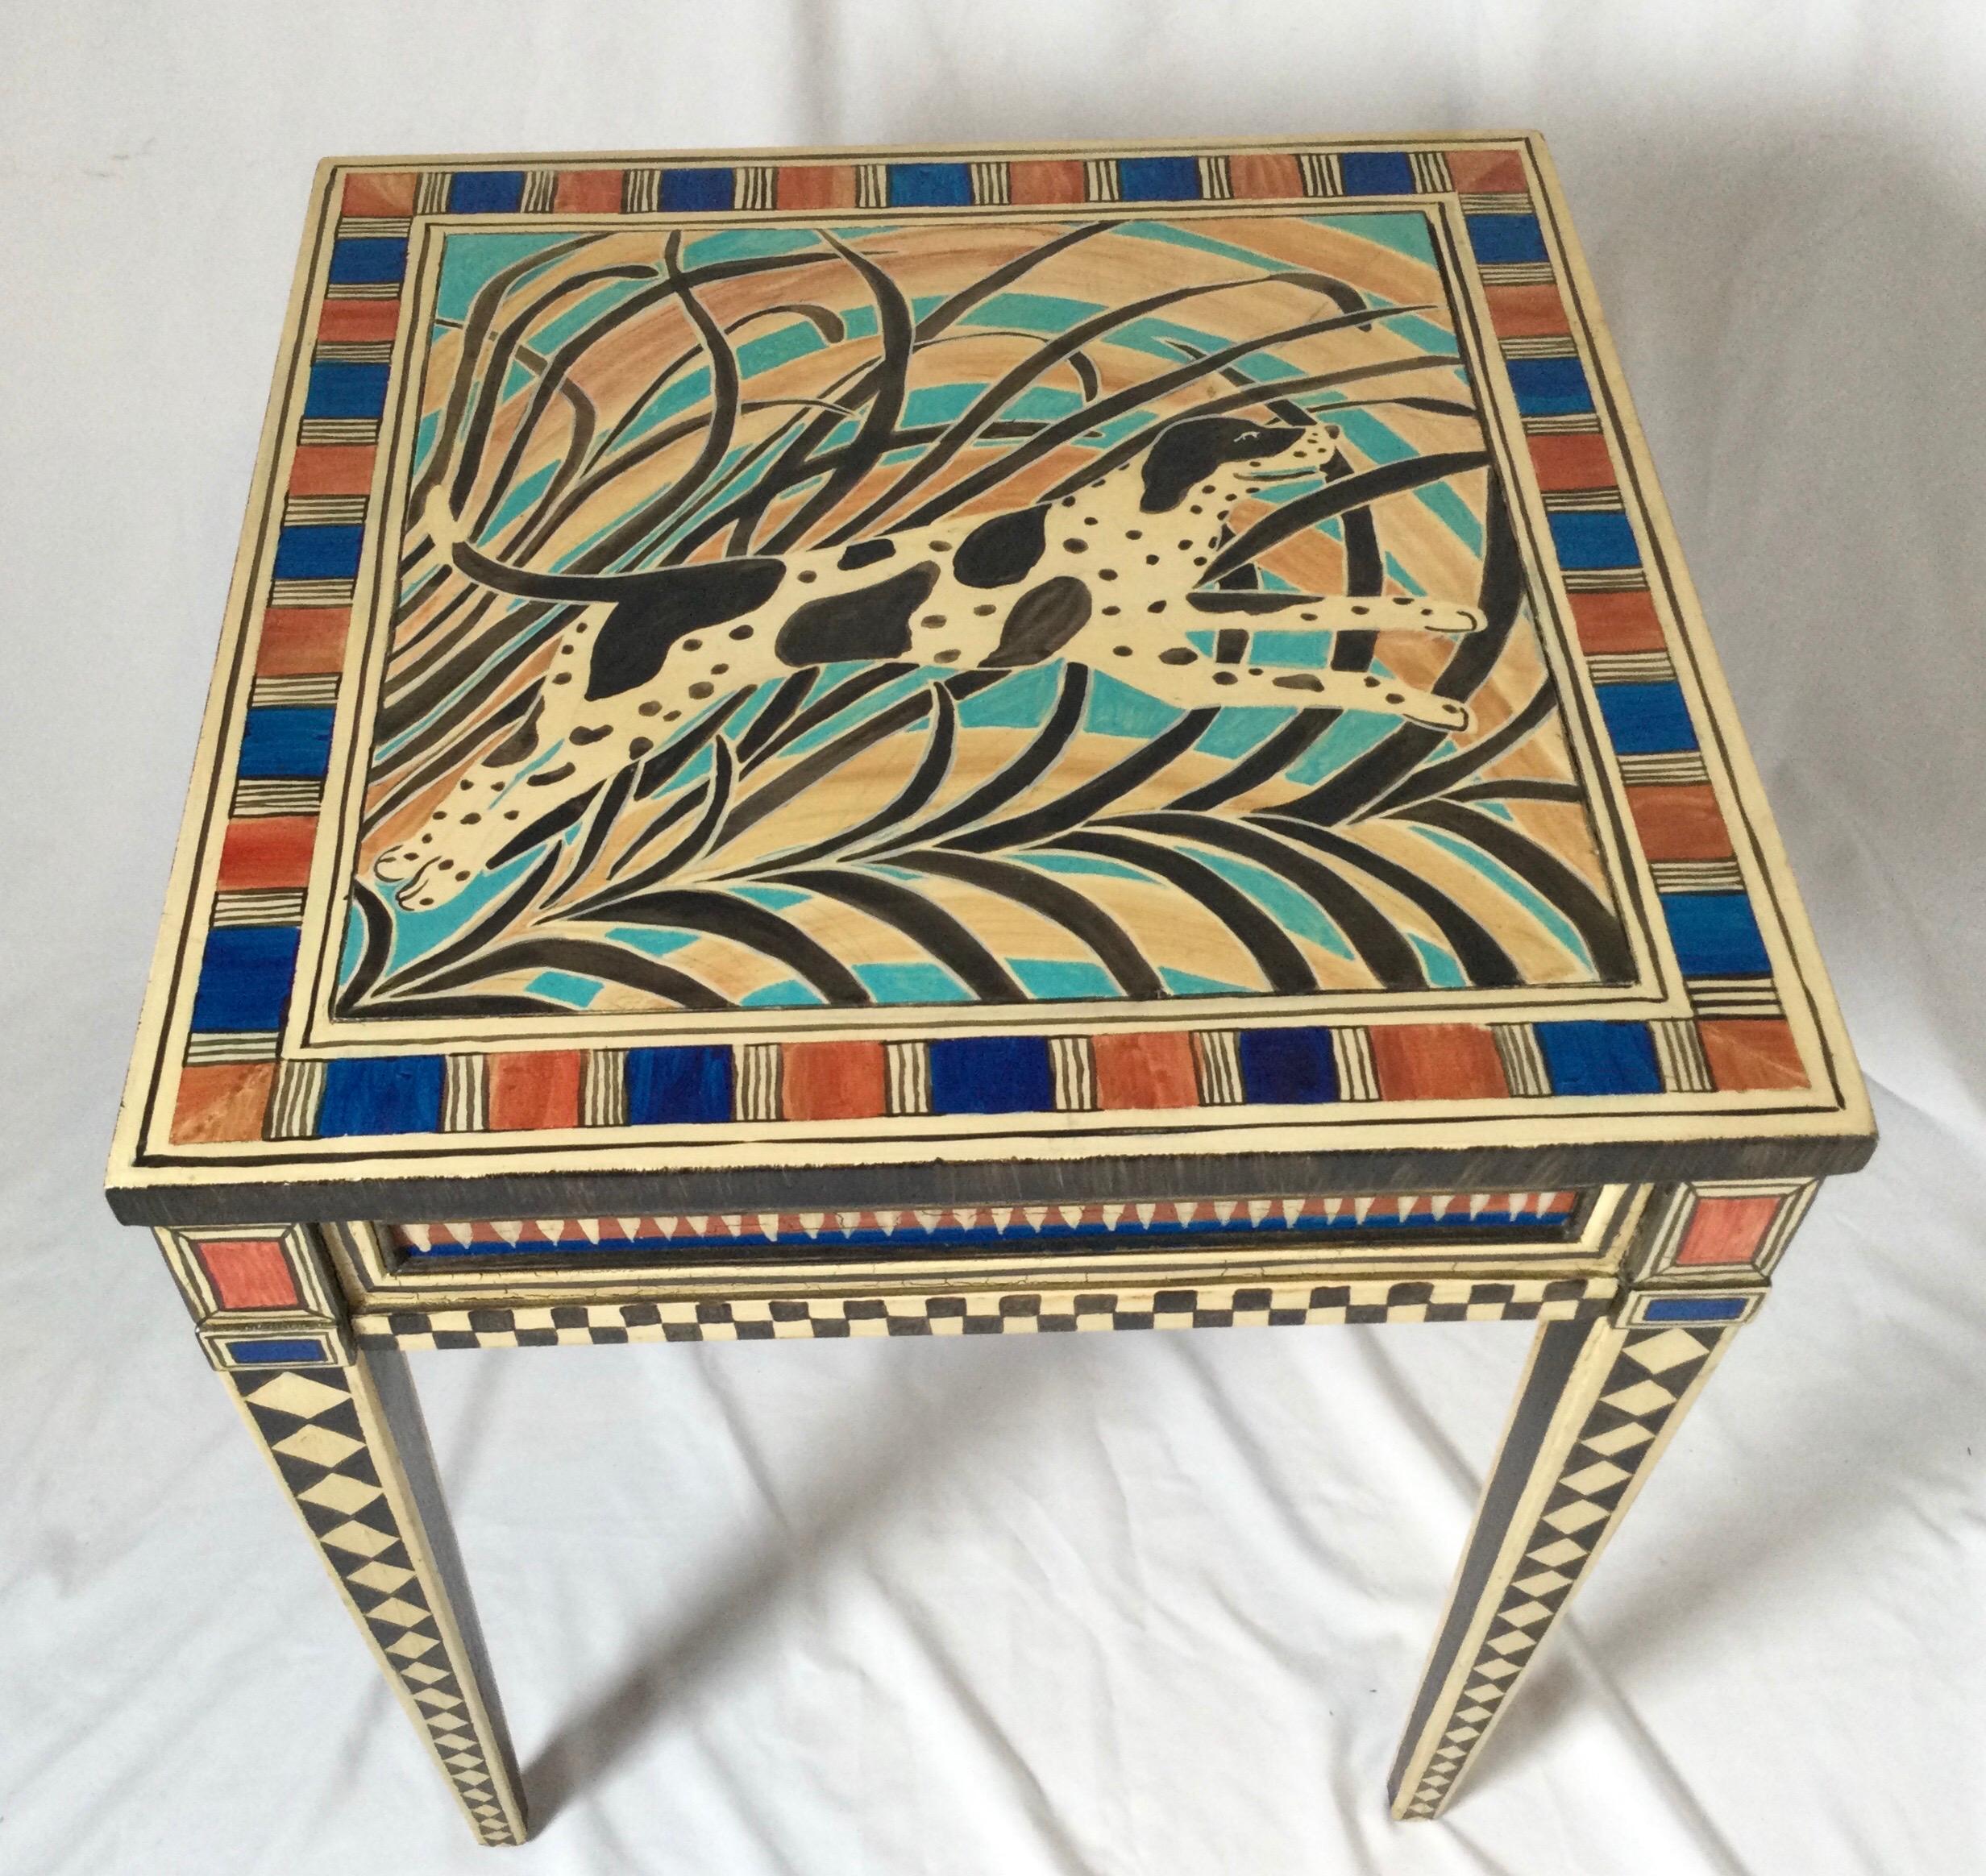 One of a kind! The top depicts a leaping spotted dog, edge banded by blue and rust pattern. Tapered legs with diamond pattern from top to bottom. Table made by Brant Furniture Co. Stands 20 3/4